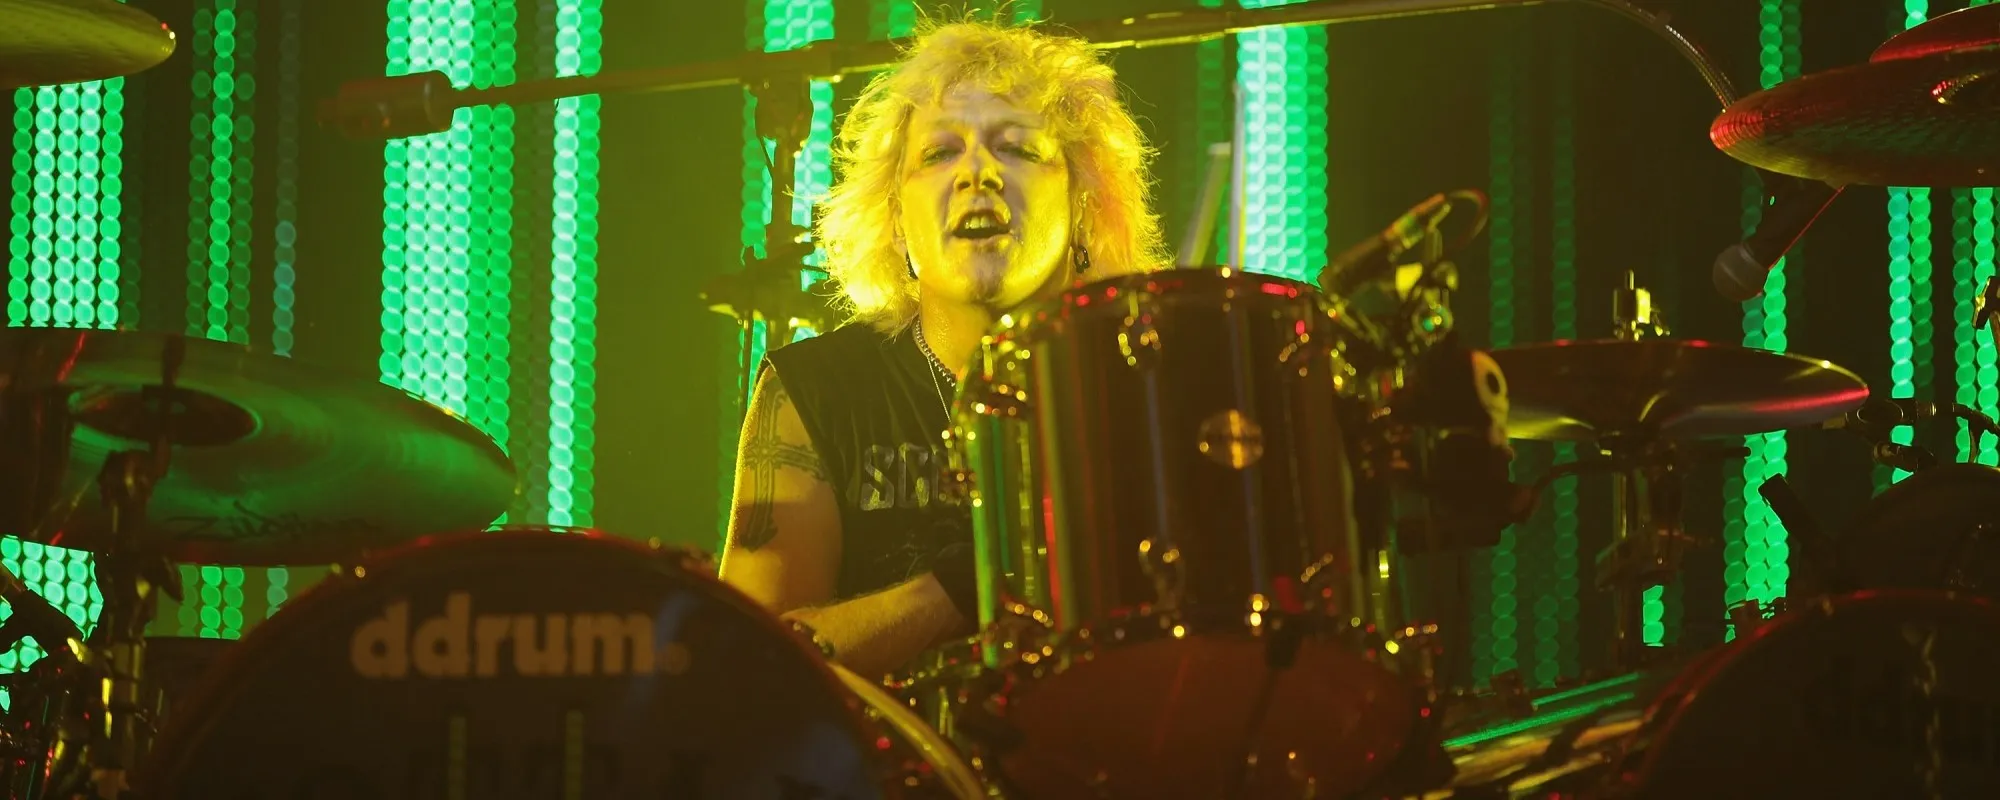 Scorpions Take to Social Media to Mourn Death of Former Drummer James Kottak: “Rock ’n’ Roll Forever”